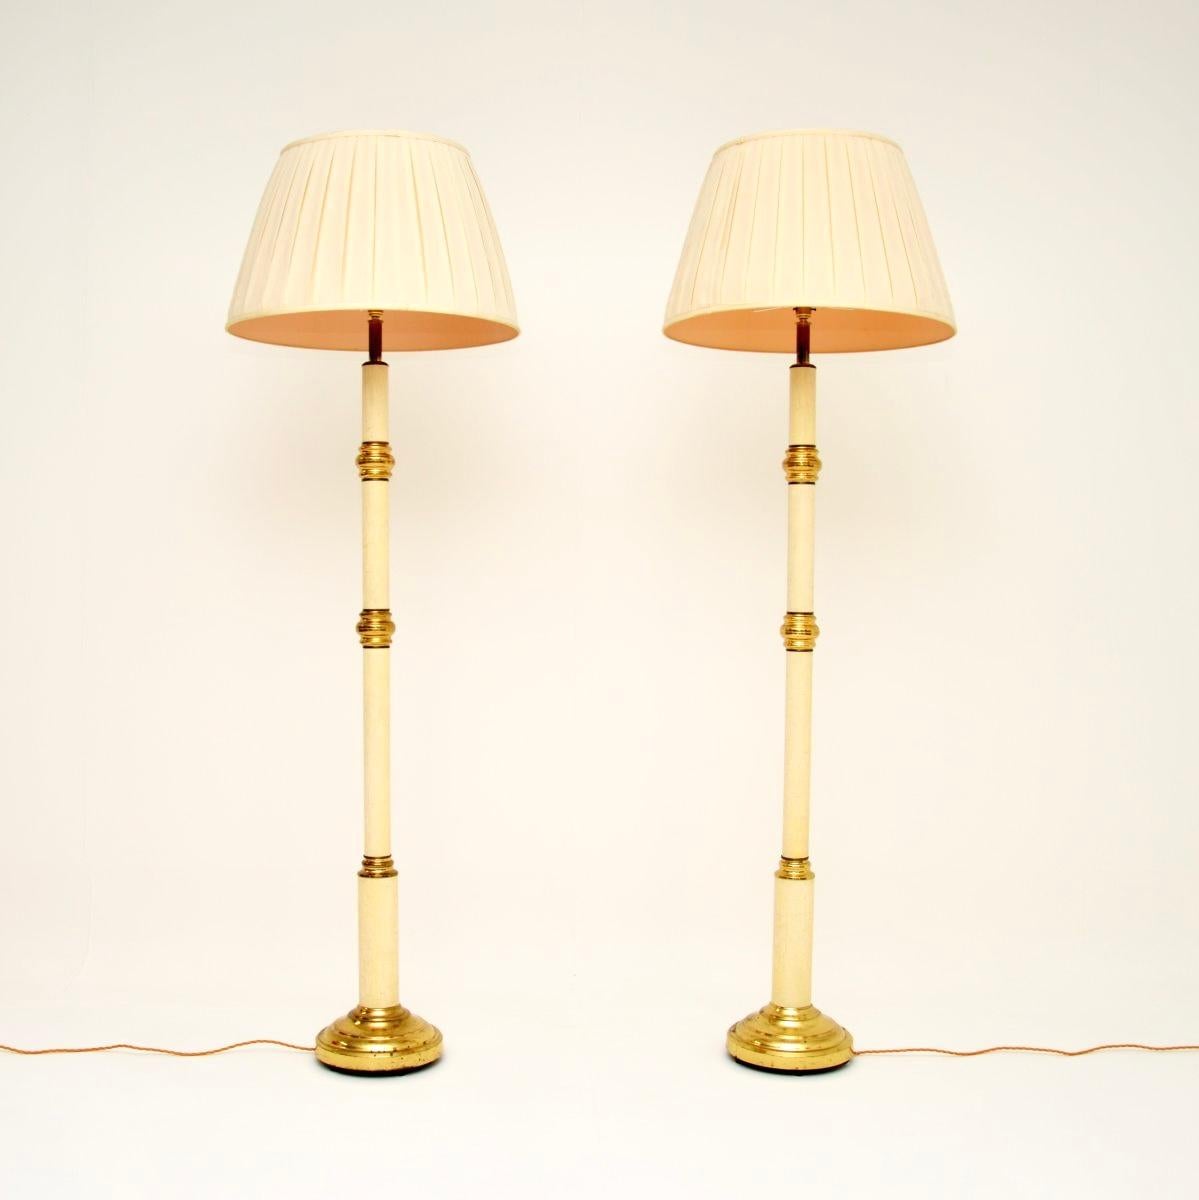 An absolutely superb pair of vintage floor lamps by Clive Rowland. They were made in England, and date from around the 1970’s.

The quality is outstanding, they are made from a combination of solid brass and enameled metal, they are very heavy and